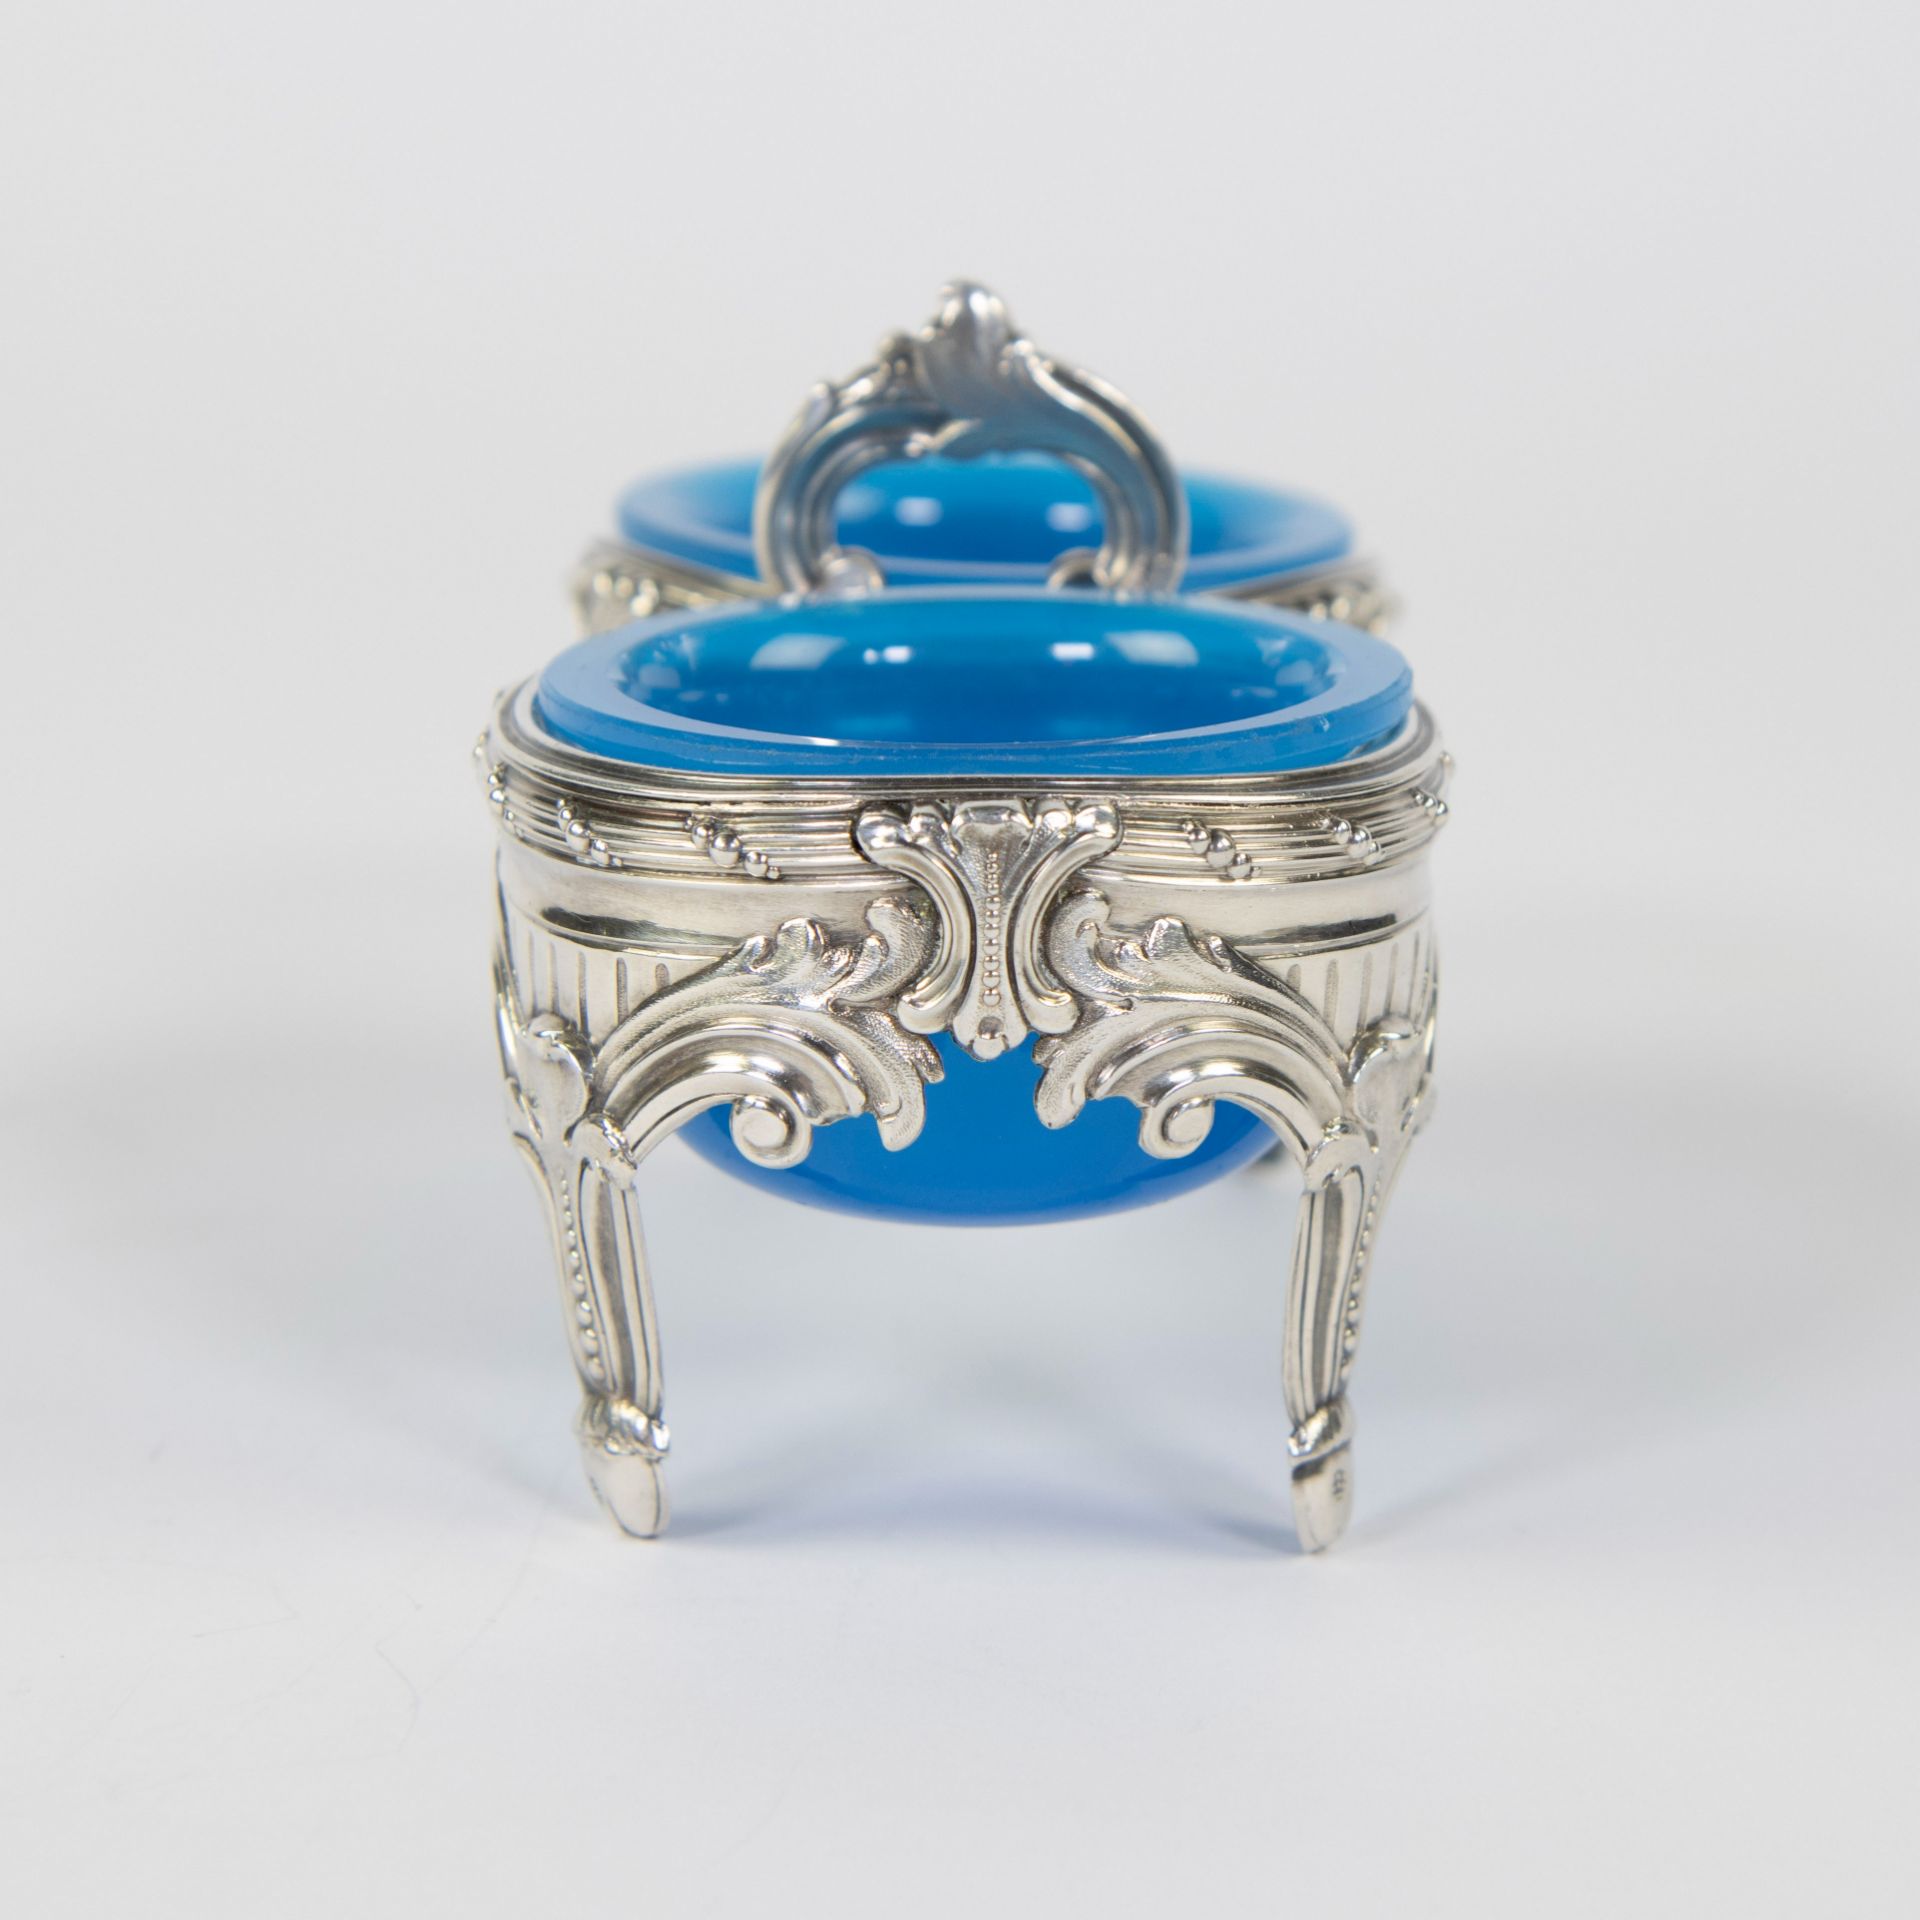 Silver salt cellar with light blue glass compartments, Mons, 18th century - Image 4 of 6